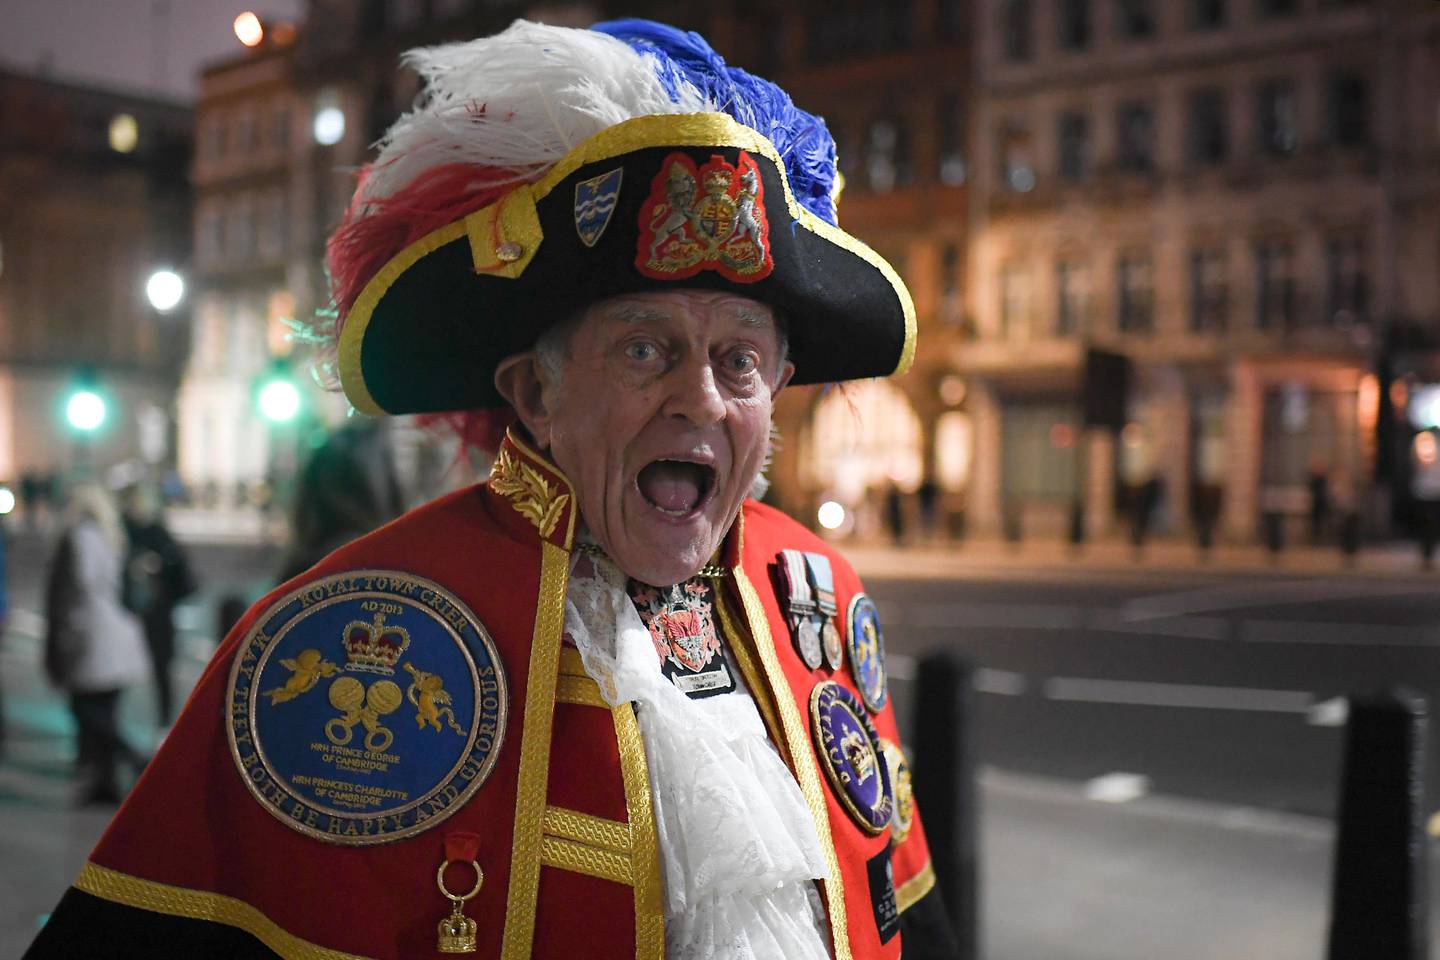 A town crier walks in London, Friday, Jan. 31, 2020. Britain officially leaves the European Union on Friday after a debilitating political period that has bitterly divided the nation since the 2016 Brexit referendum.(AP Photo/Alberto Pezzali)